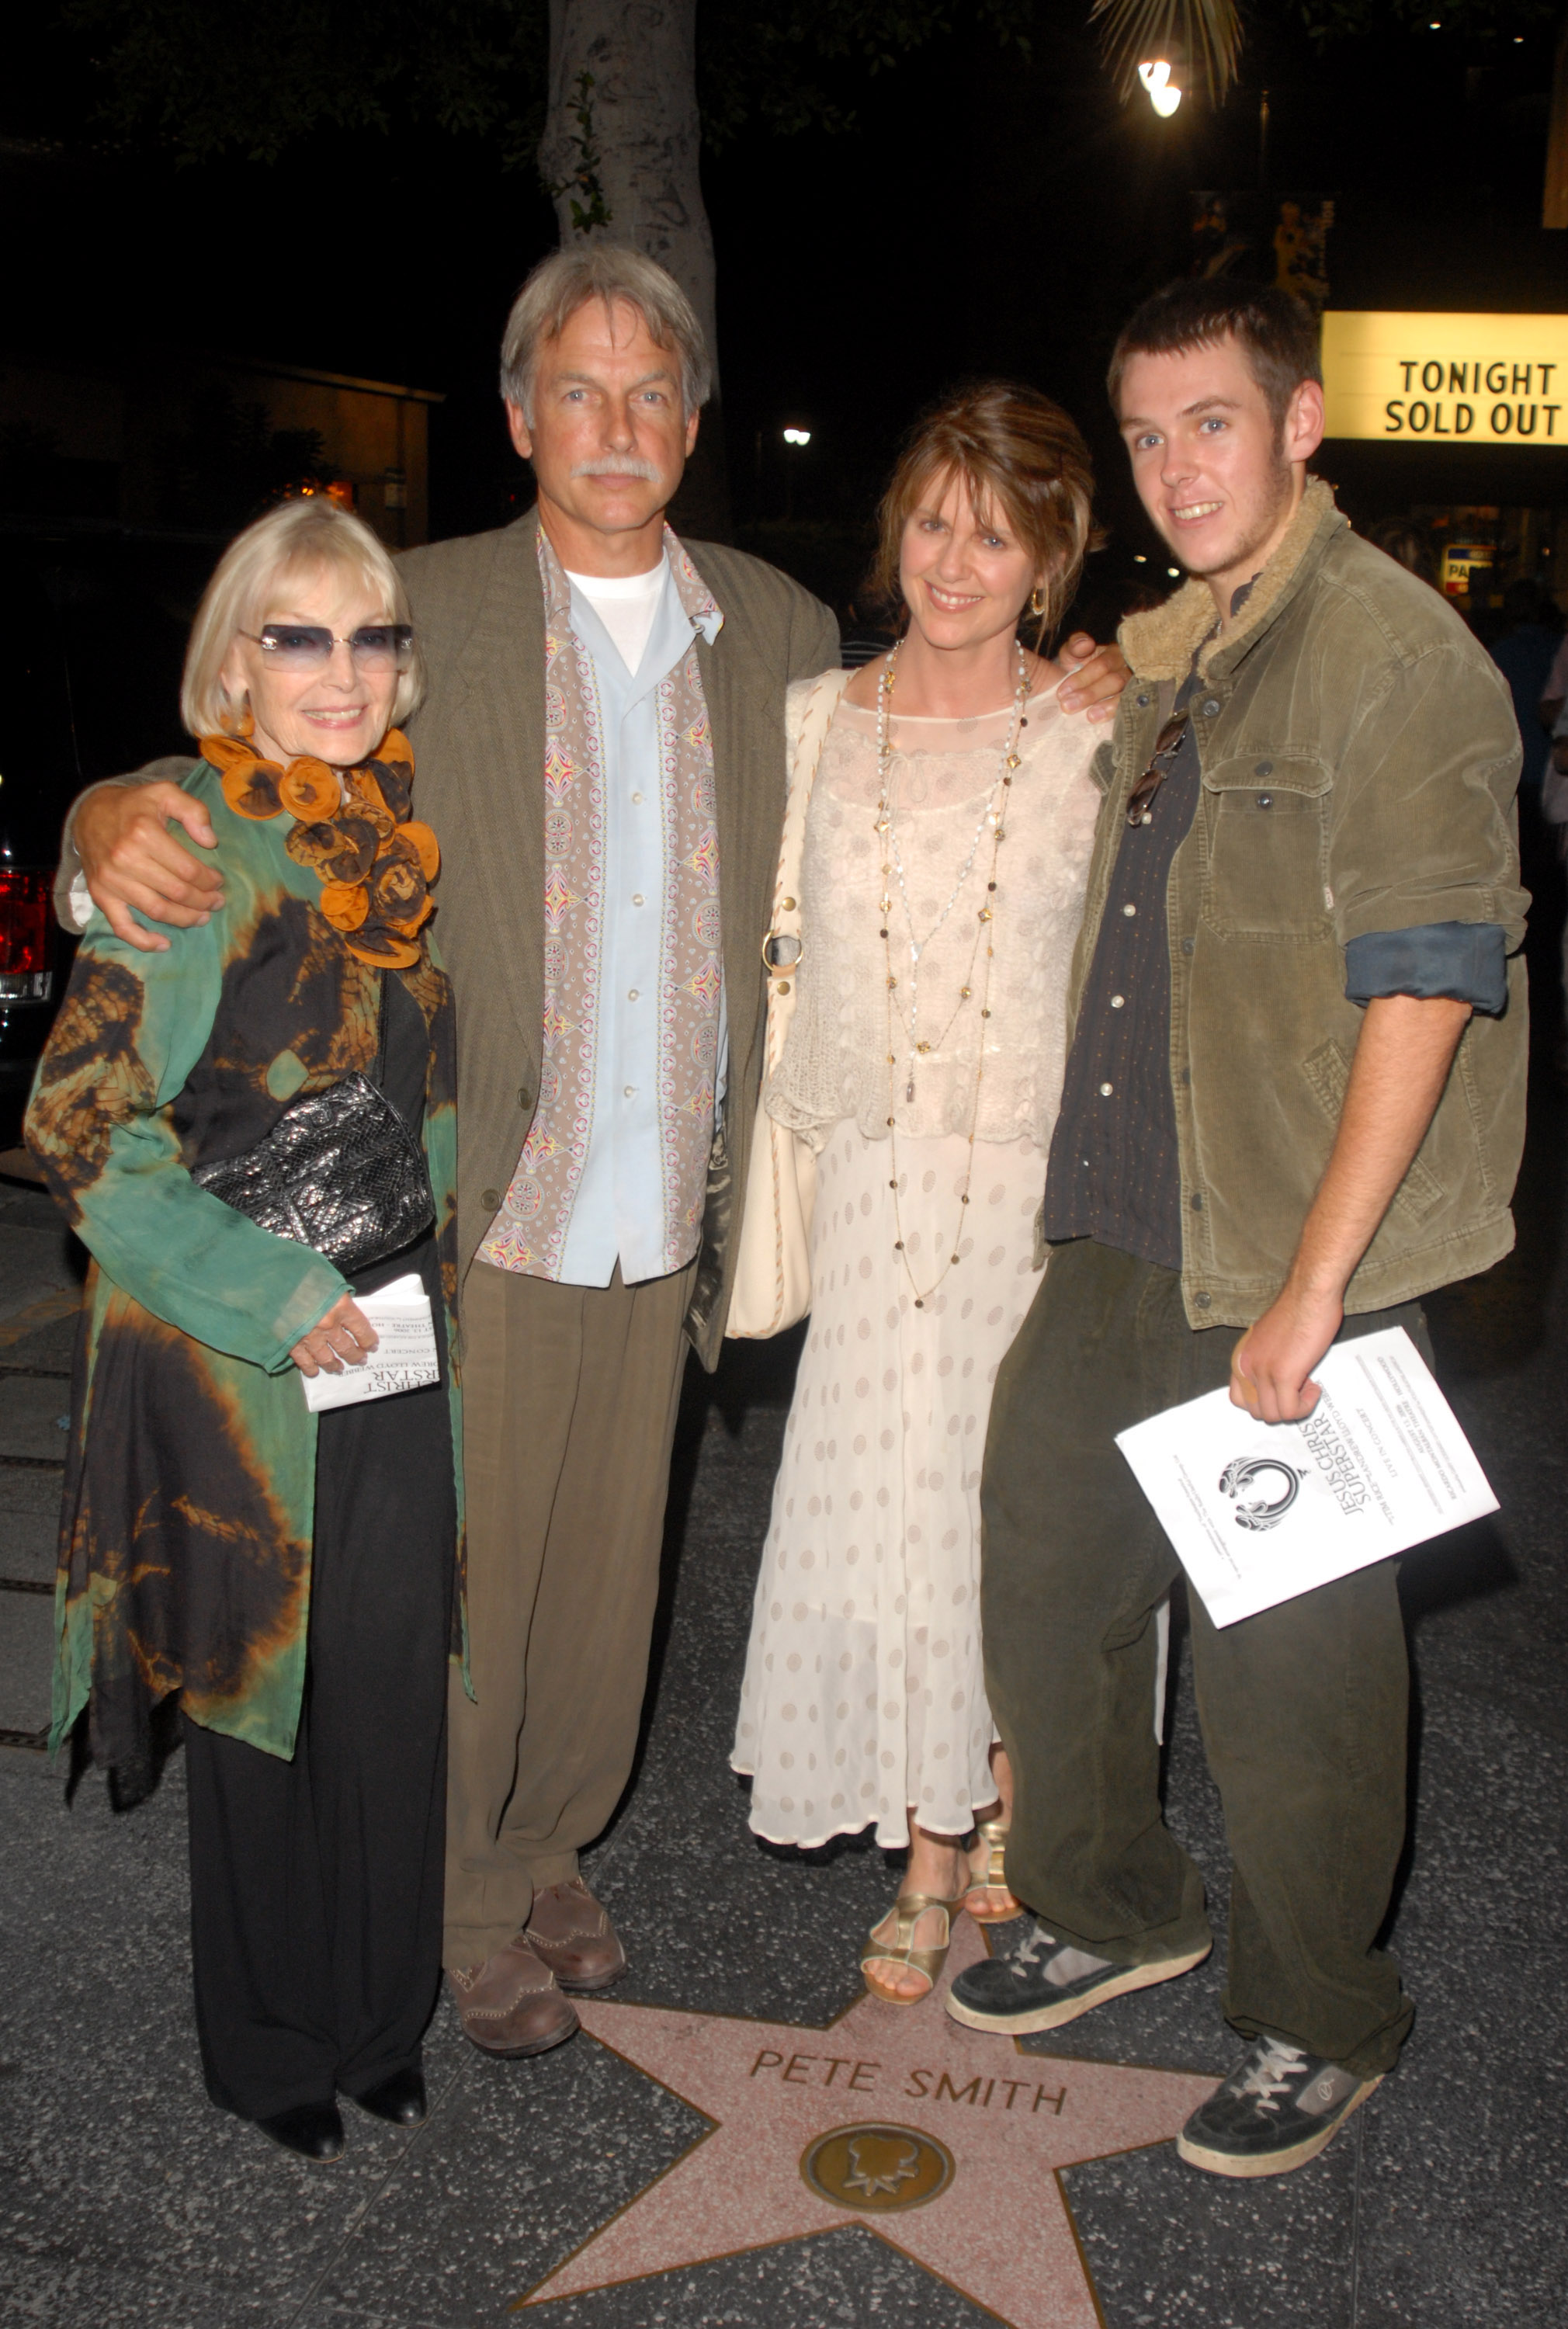 Elyse Knox, Mark Harmon, Pam Dawber, and the couple's son Sean at the "Jesus Christ Superstar" Los Angeles Performance on August 13, 2006, in California | Source: Getty Images